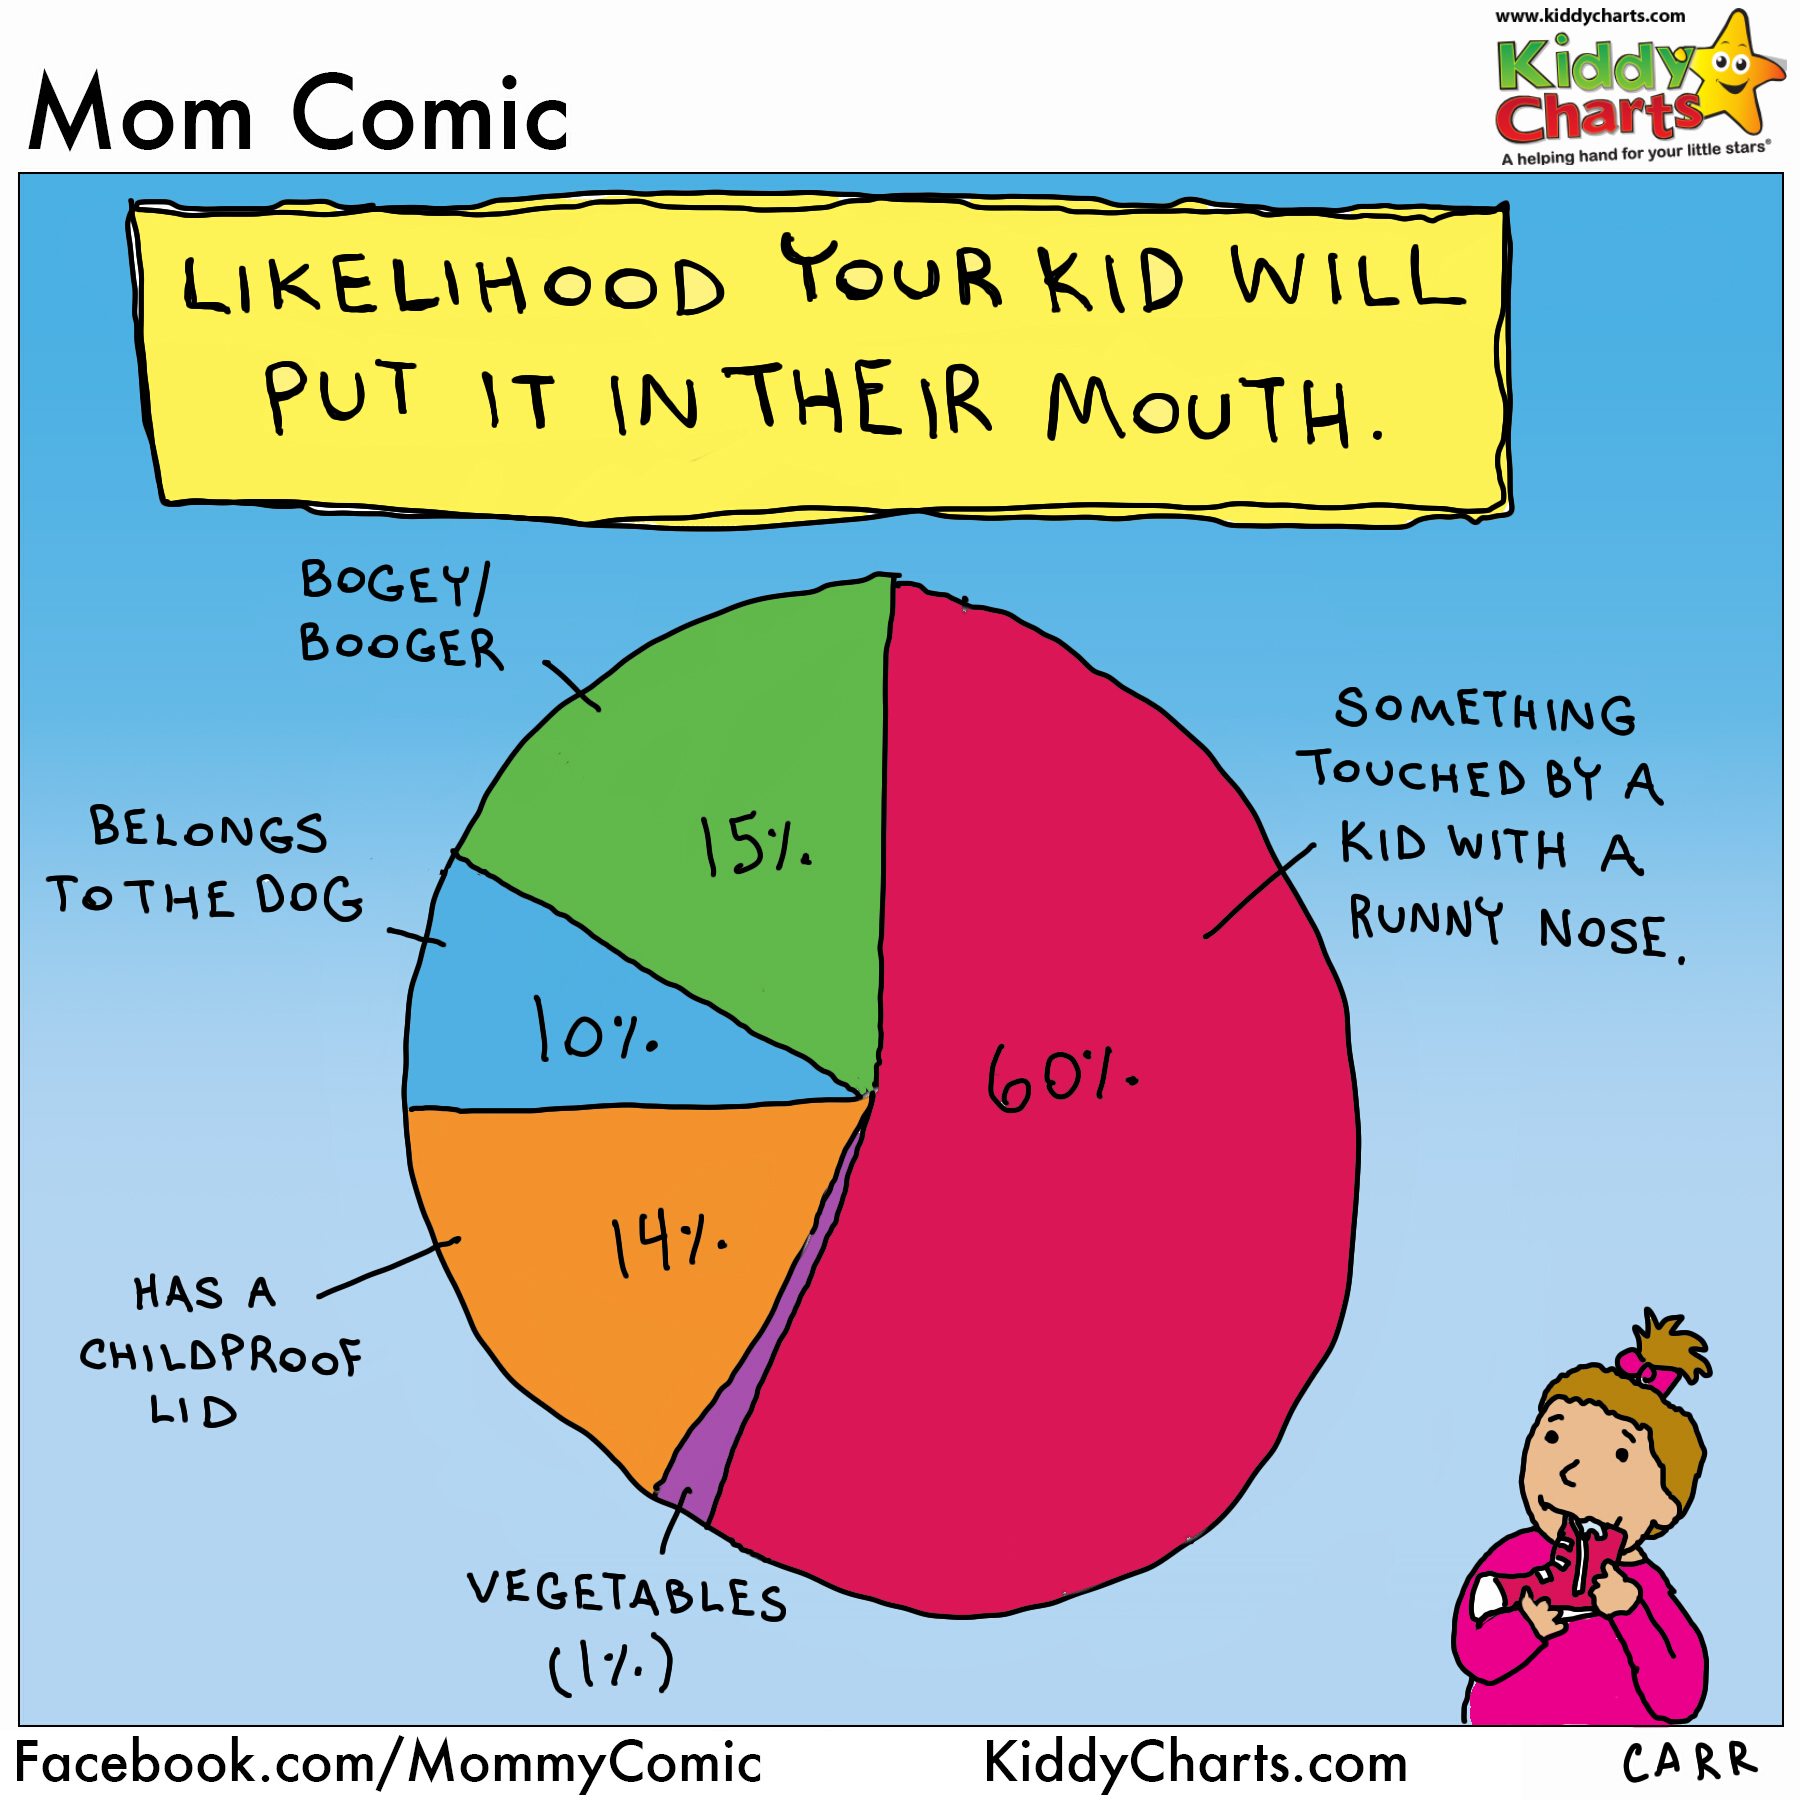 What your kids really want to put in their mouth - ALL THE TIME! We've got more great fun parenting charts and printables on the site. Come check them out; for a smile, or for some activities for you and yours.